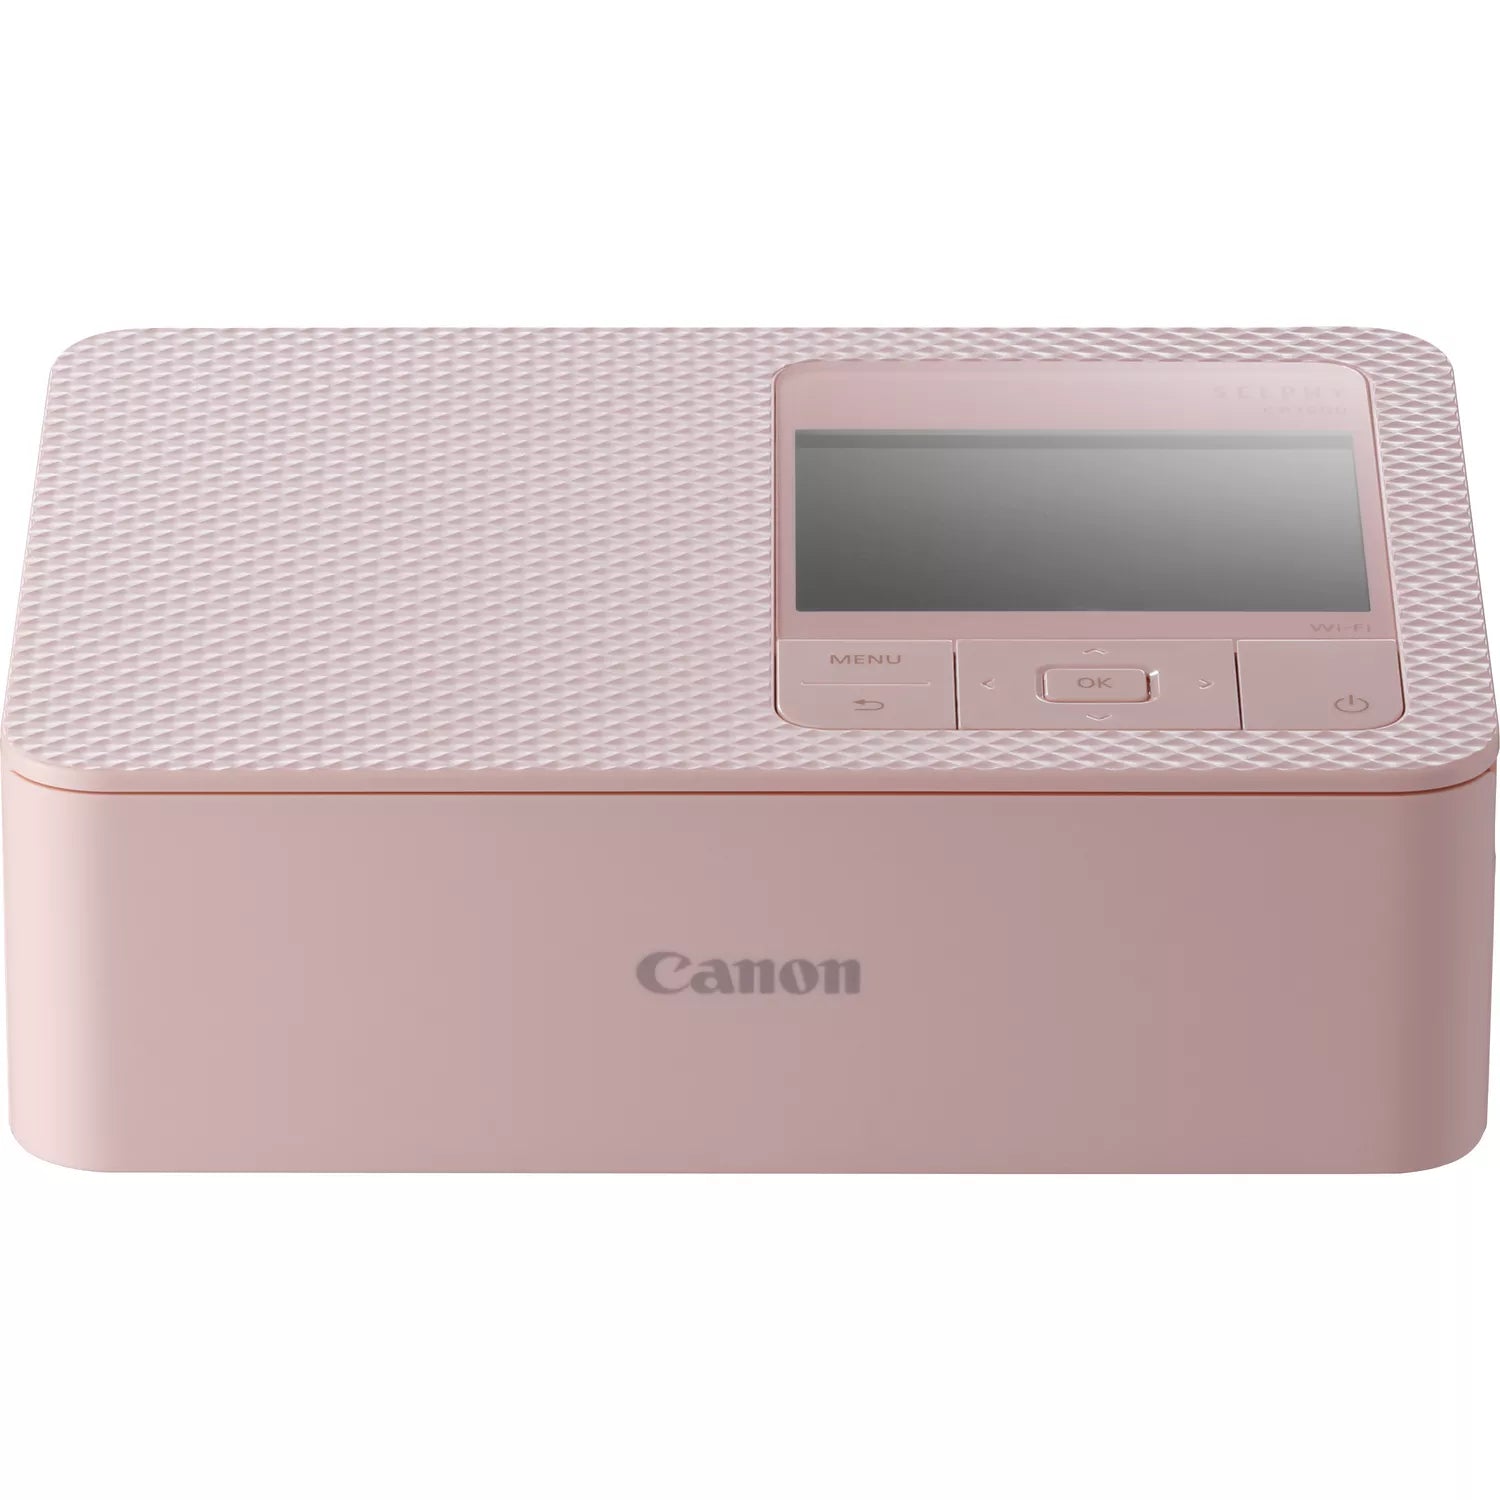 Product Image of Canon SELPHY CP1500 Printer - Pink